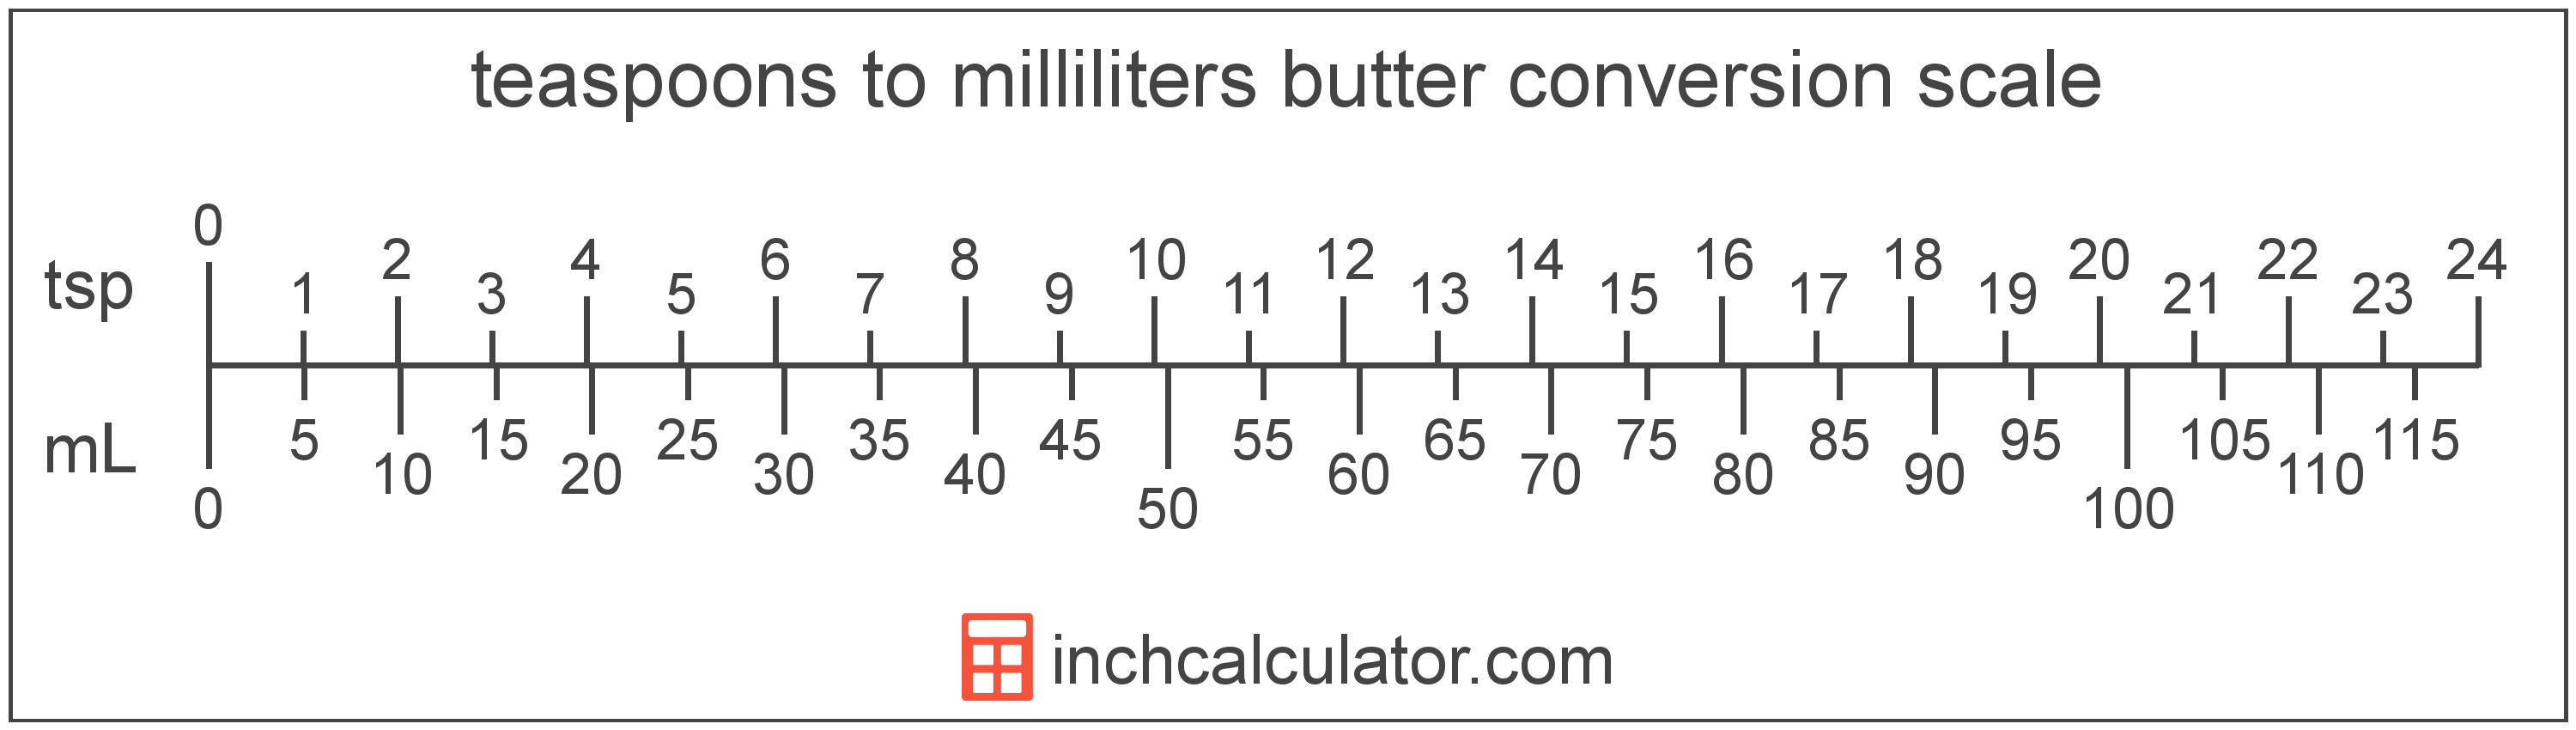 conversion scale showing milliliters and equivalent teaspoons butter values